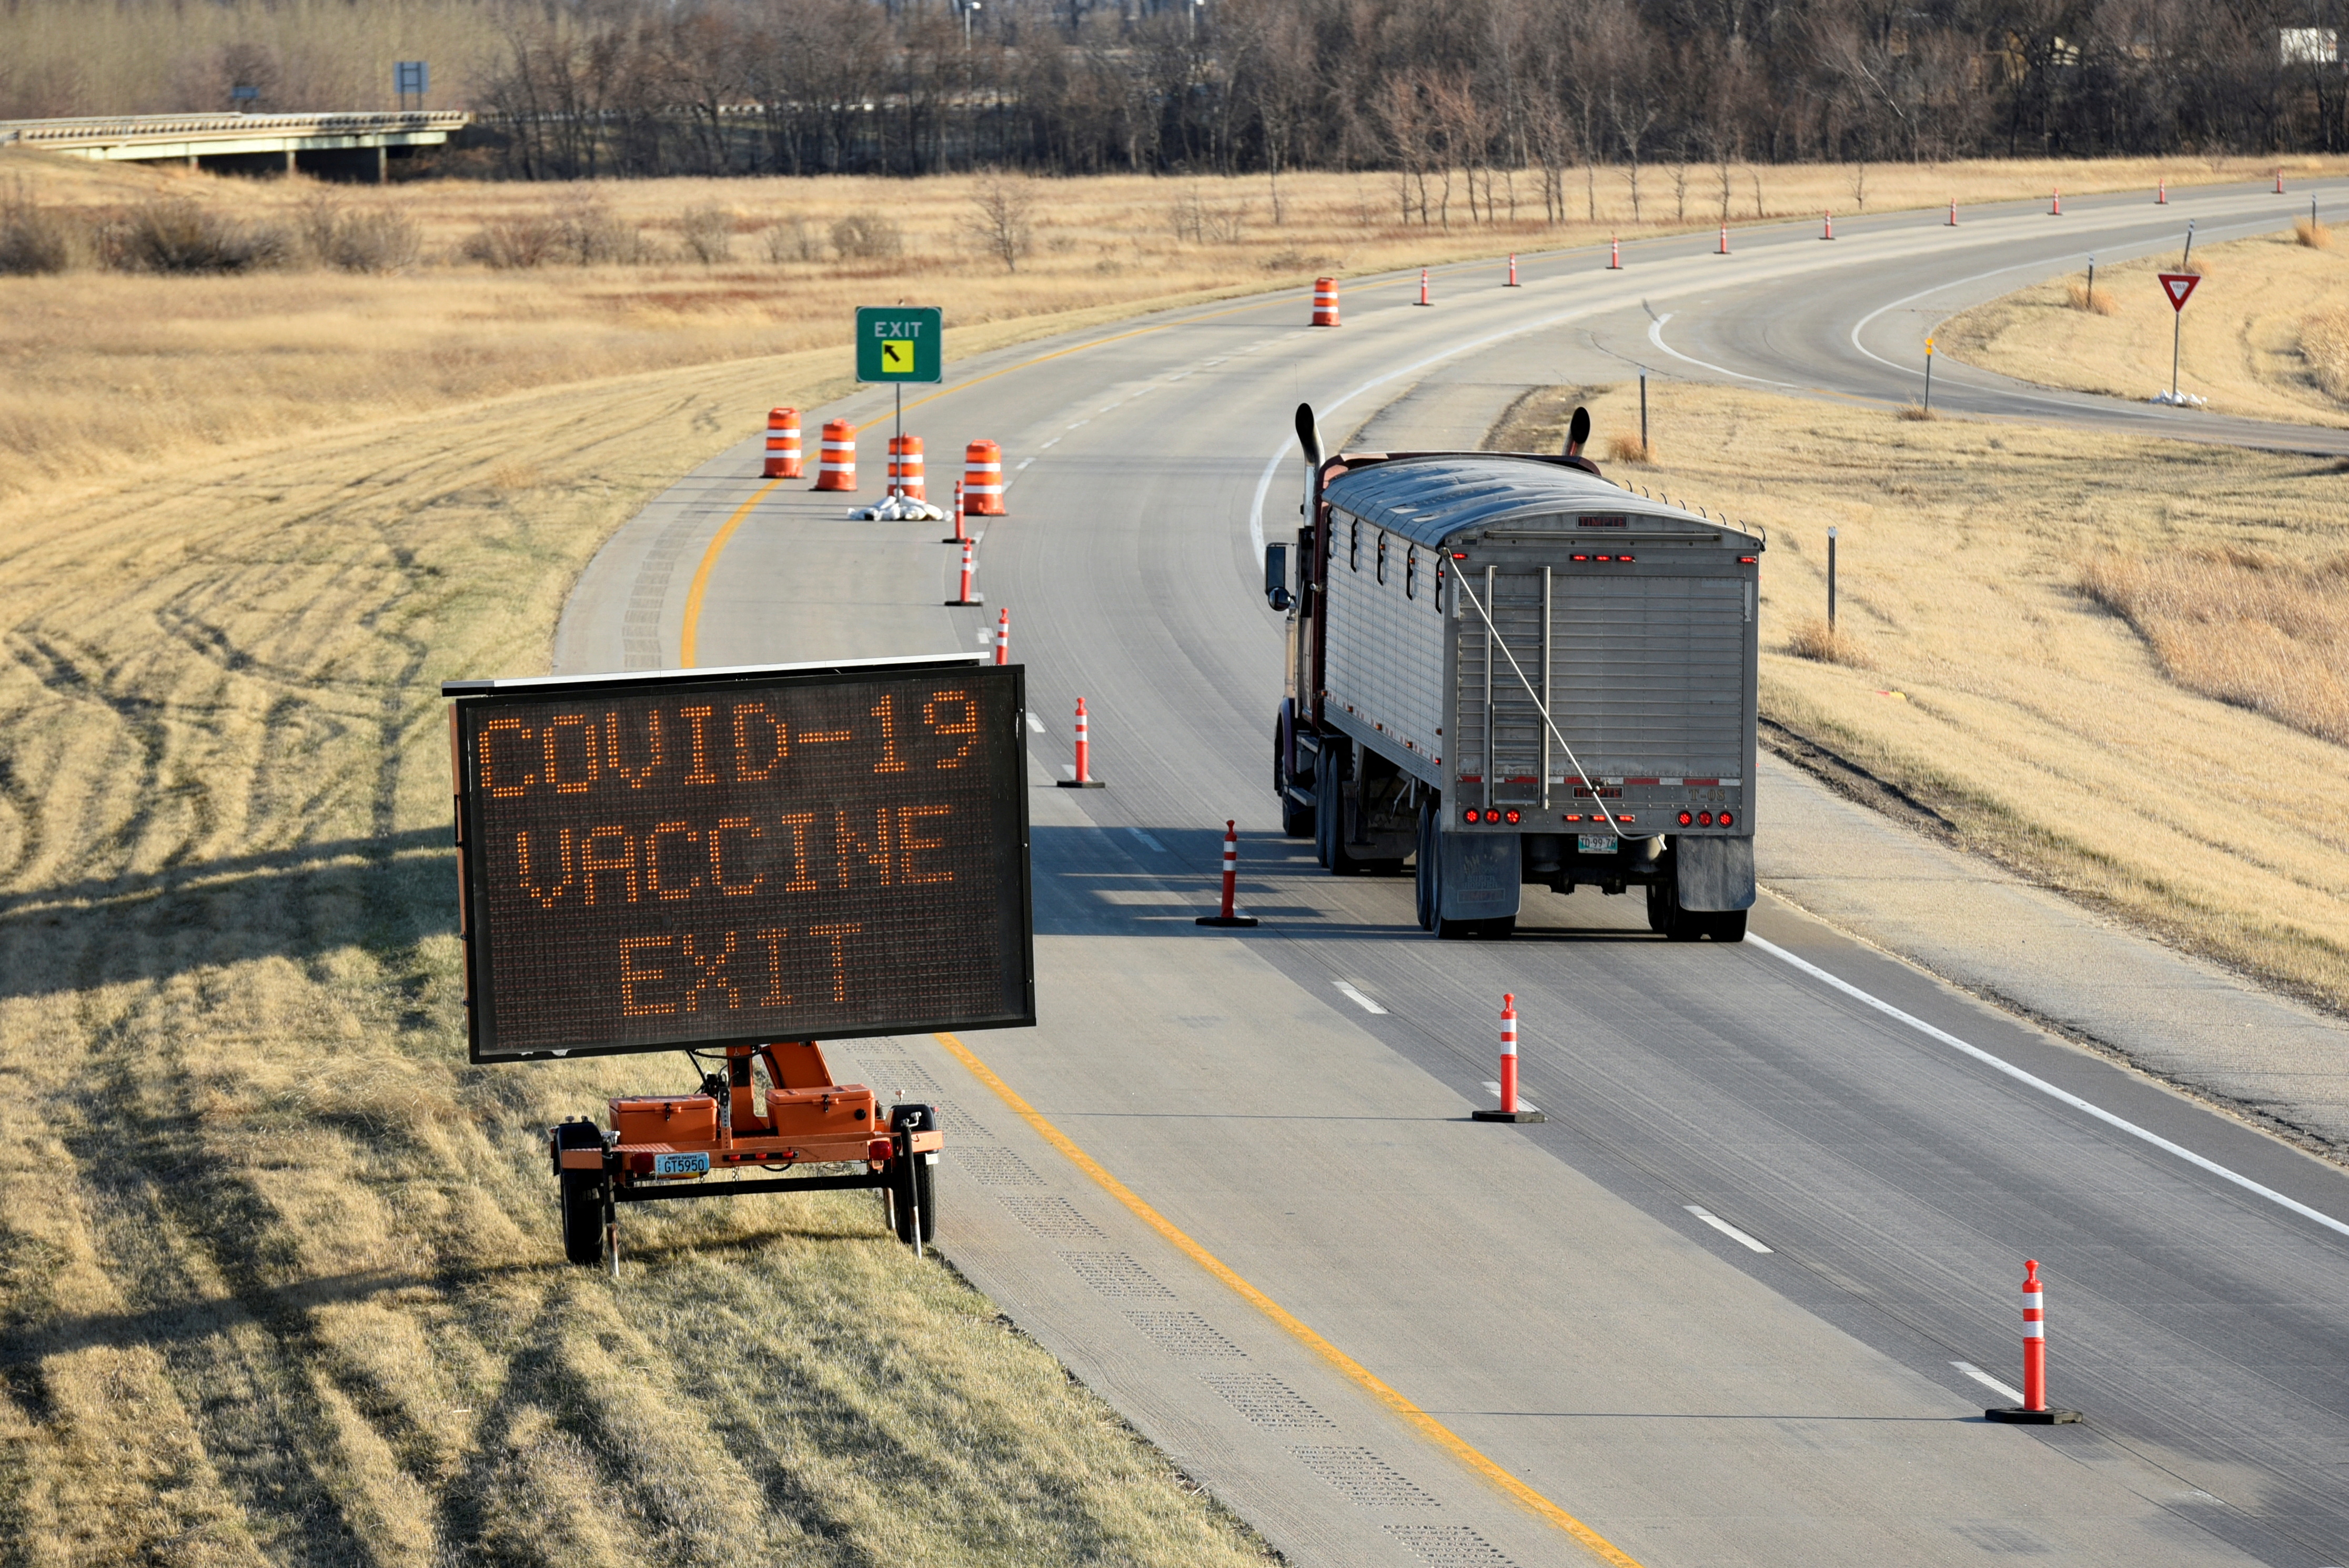 Manitoba-based truckers, transporting goods to and from the United States, are being vaccinated against coronavirus disease (COVID-19) as part of a deal between the Canadian province and the state of North Dakota, at a rest stop near Drayton, North Dakota, U.S. April 22, 2021.   REUTERS/Dan Koeck